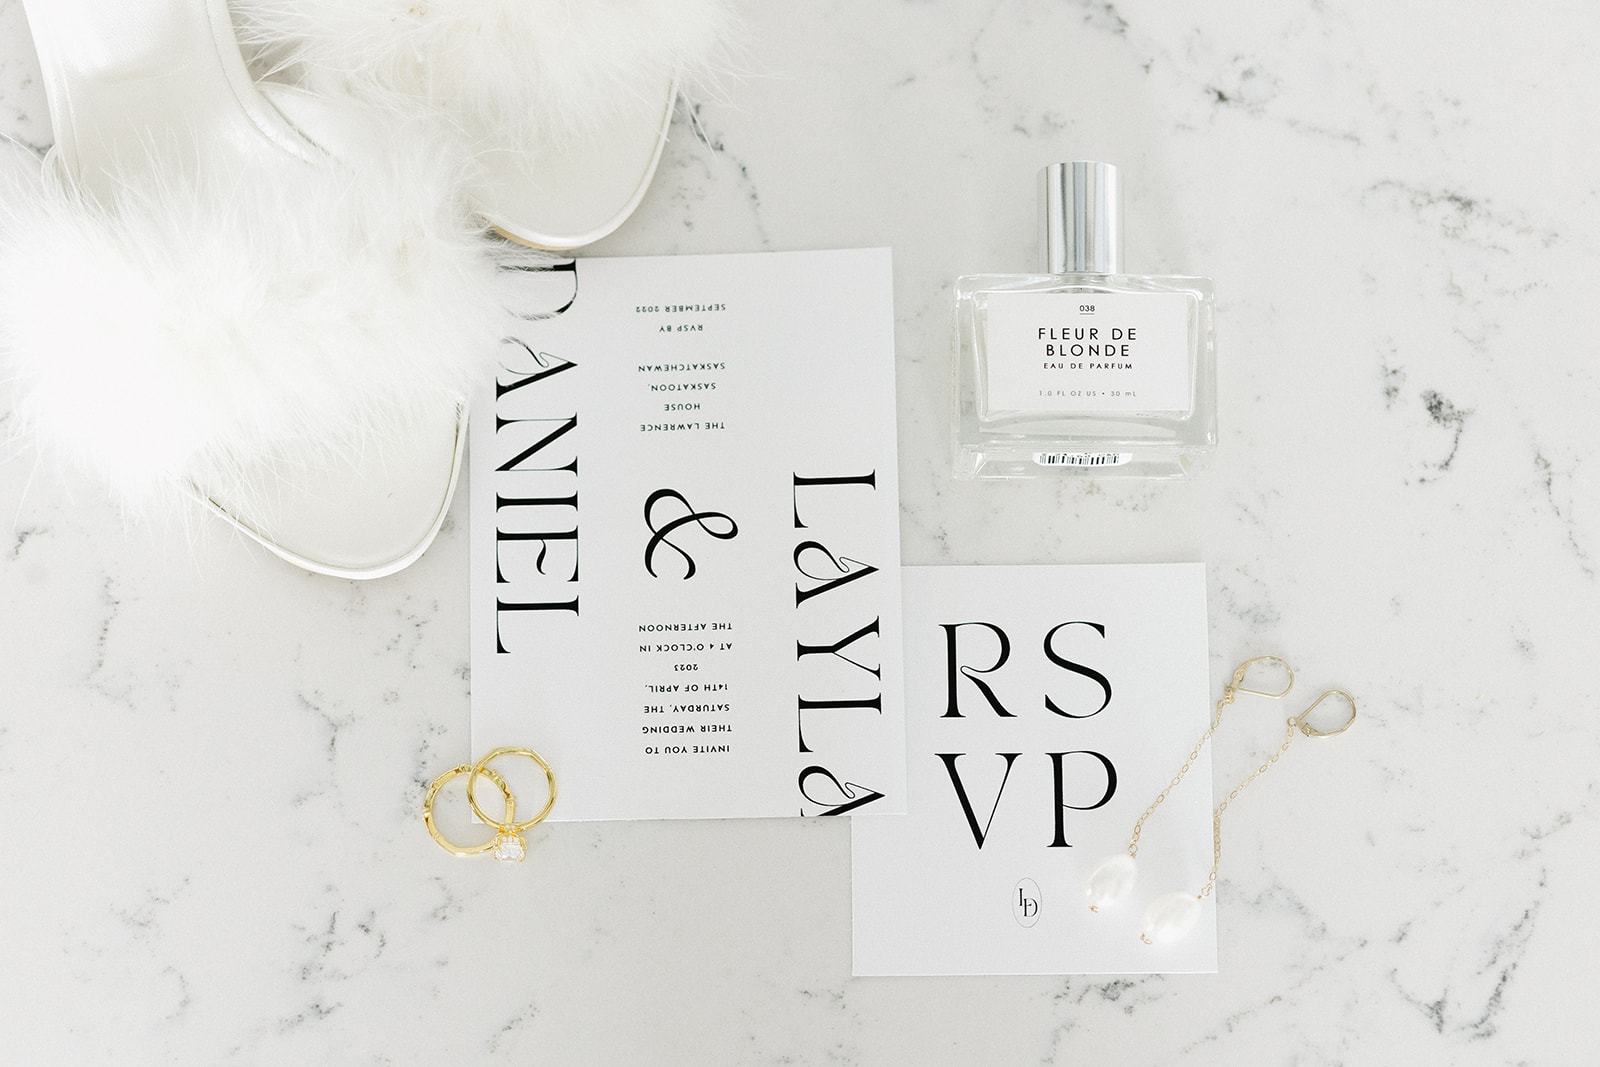 Vintage Hollywood glam inspired invitation and bridal details, styled and captured by Photography by Taiya.